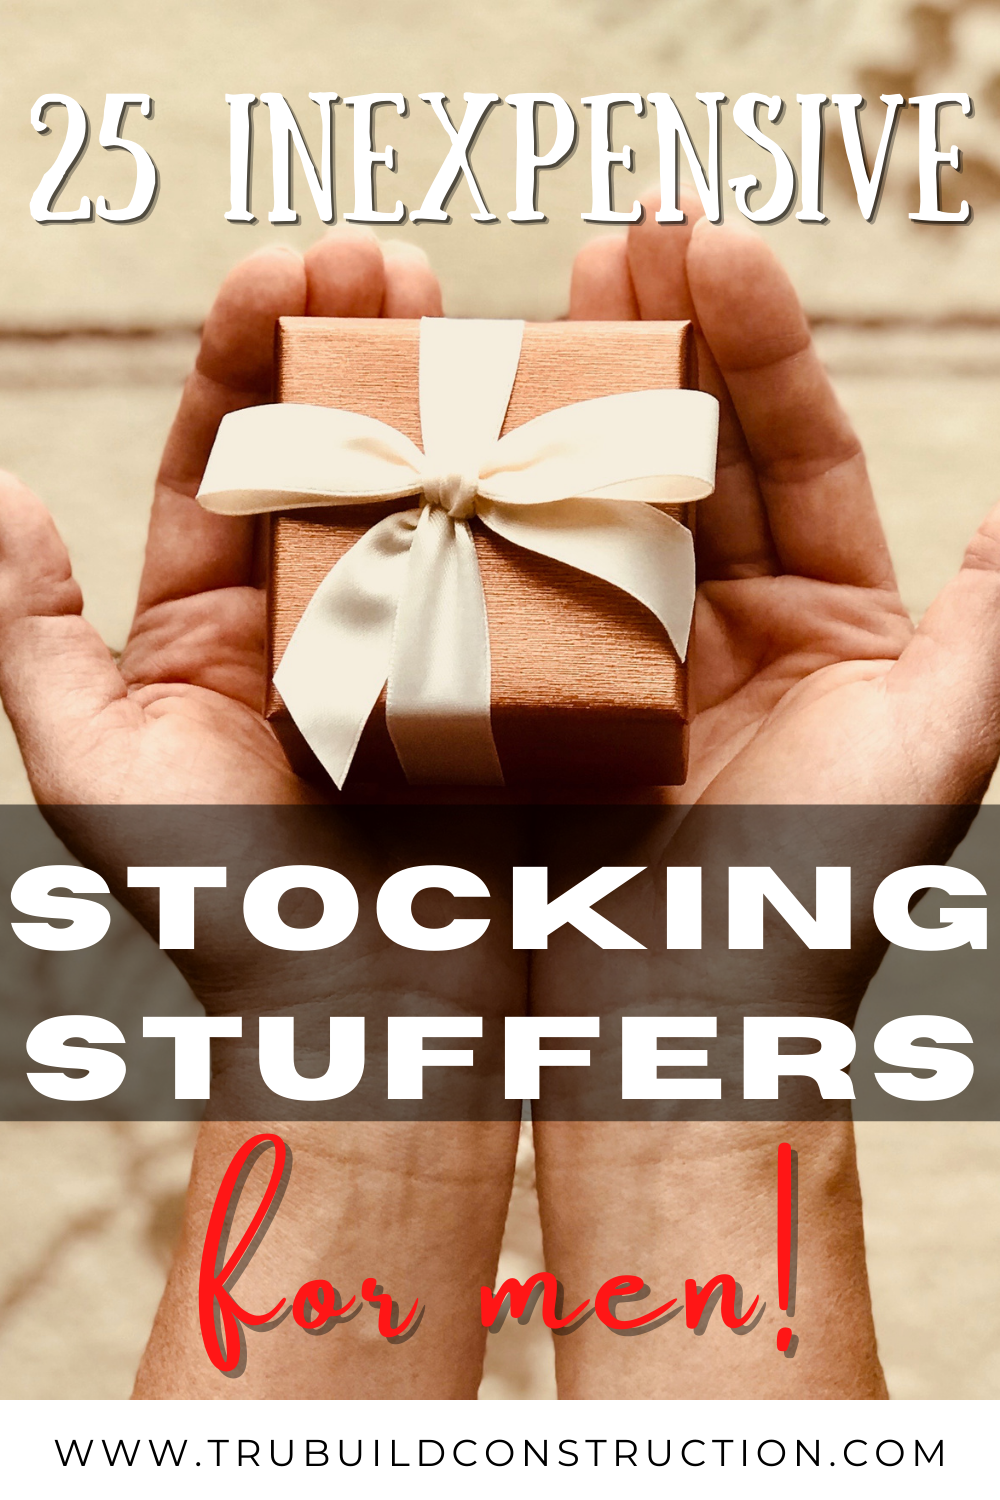 25 Of The Best Useful And Inexpensive Stocking Stuffer Ideas For Men —  TruBuild Construction